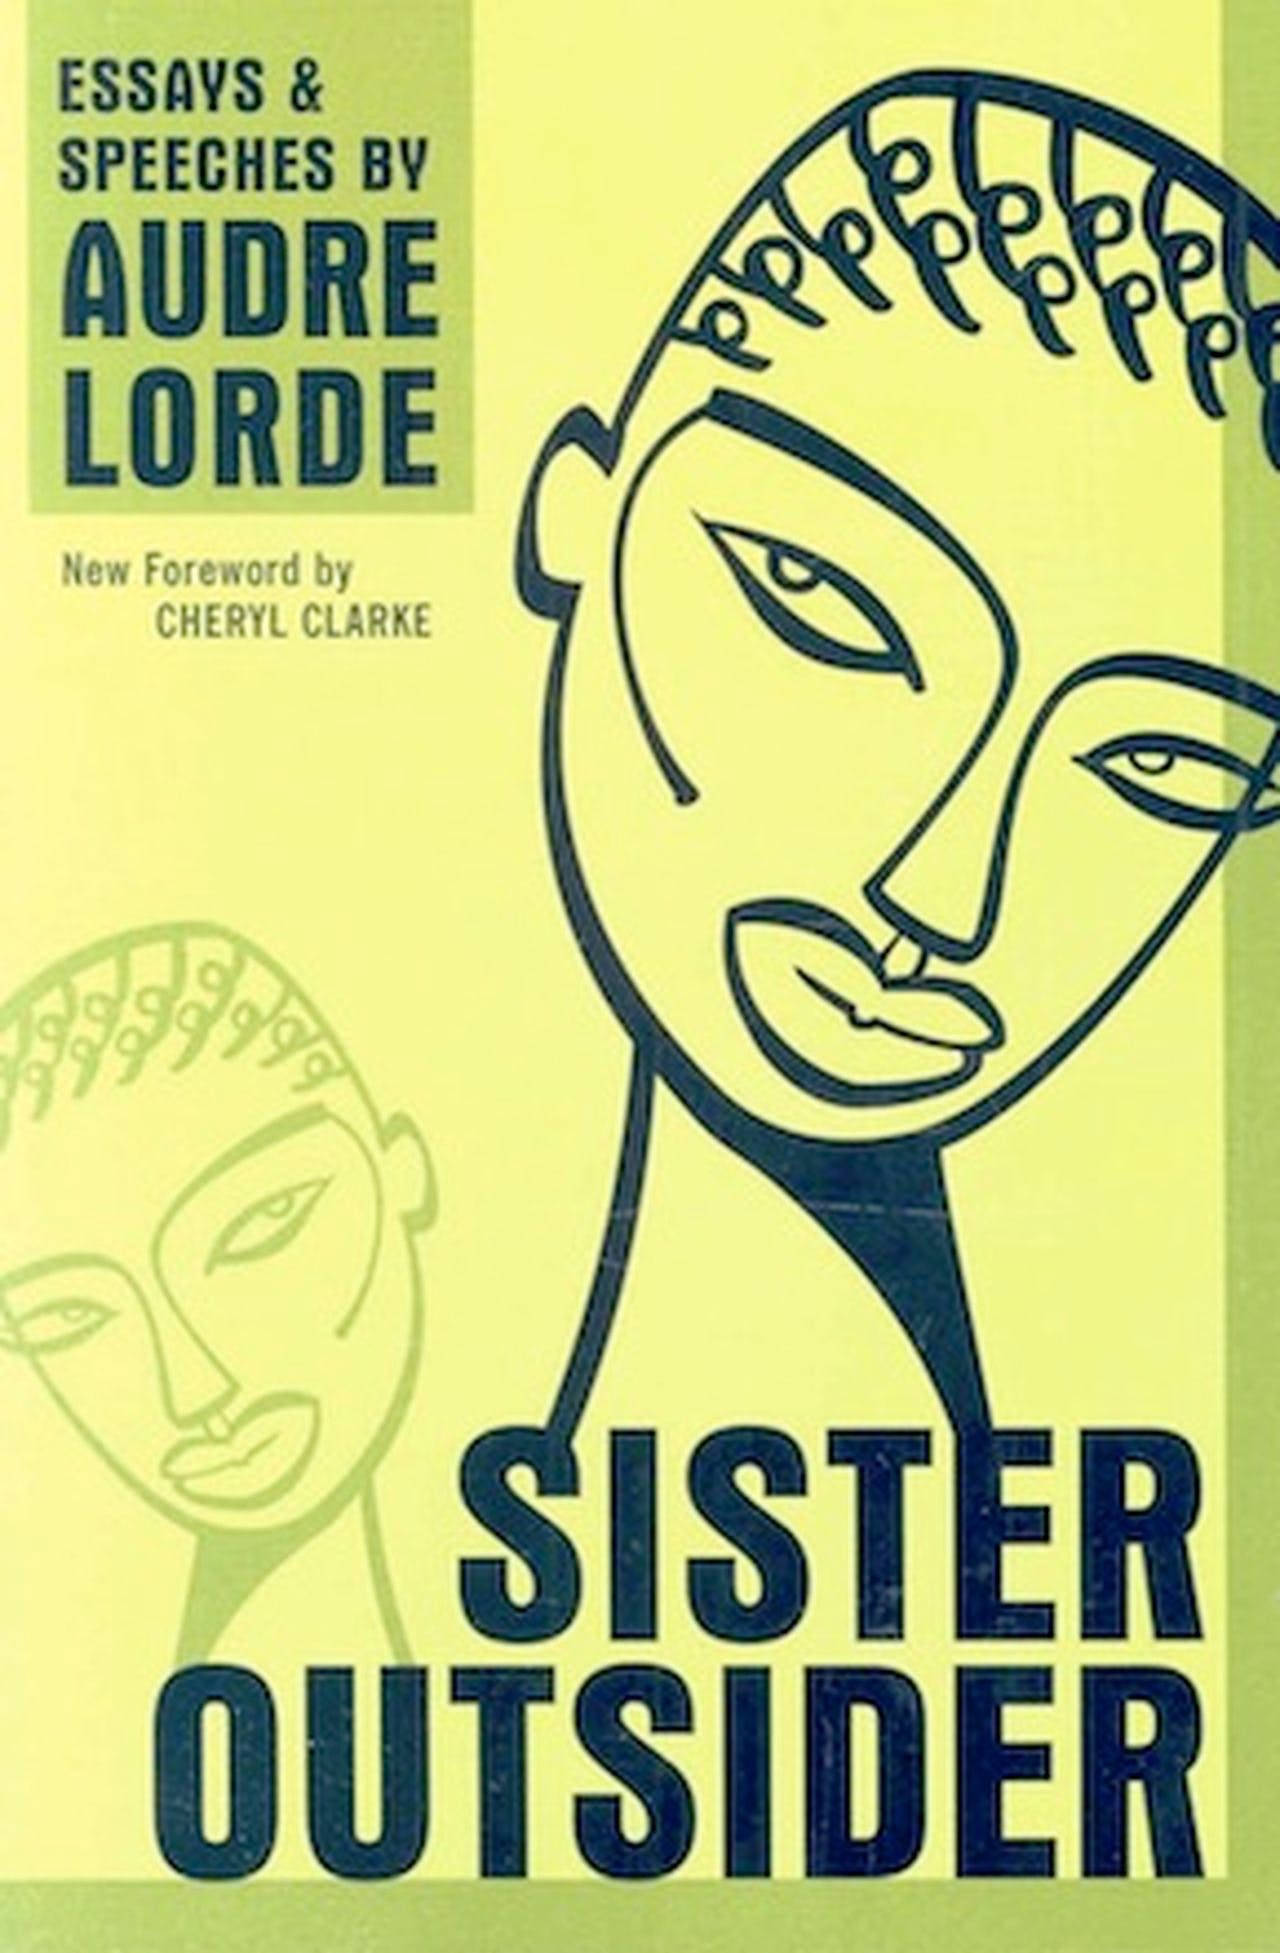 Sister Outsider, by Audre Lorde